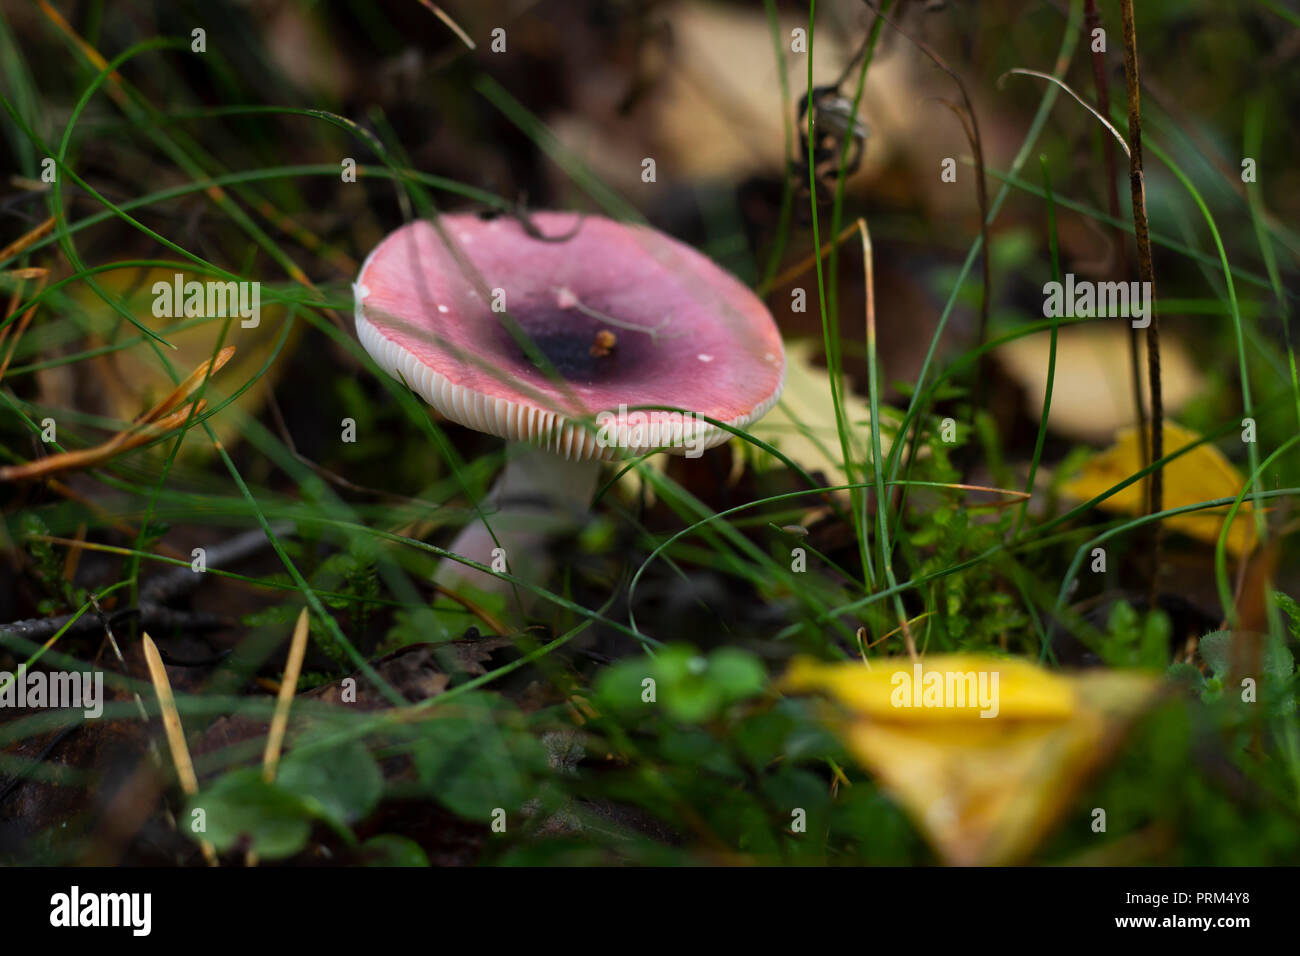 Russula obscura mushroom in a swedish forest. Horizontal. Stock Photo